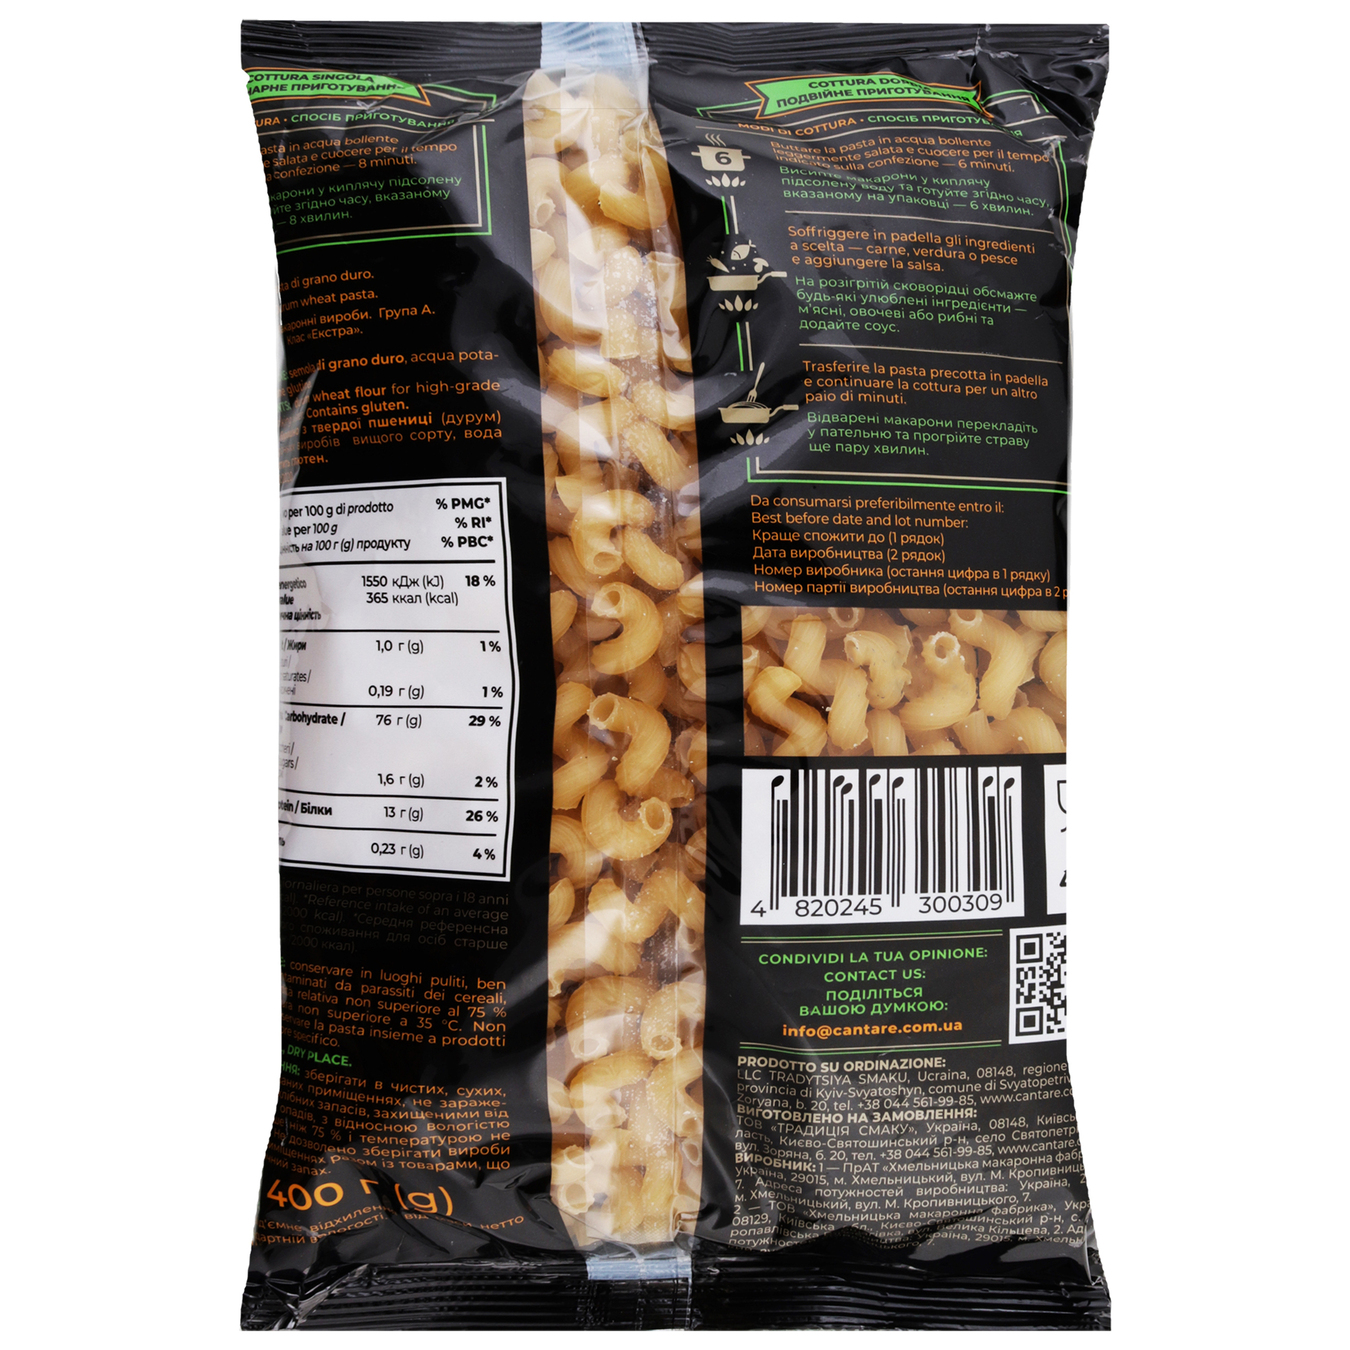 Cantare Cellentani pasta products 400g 2